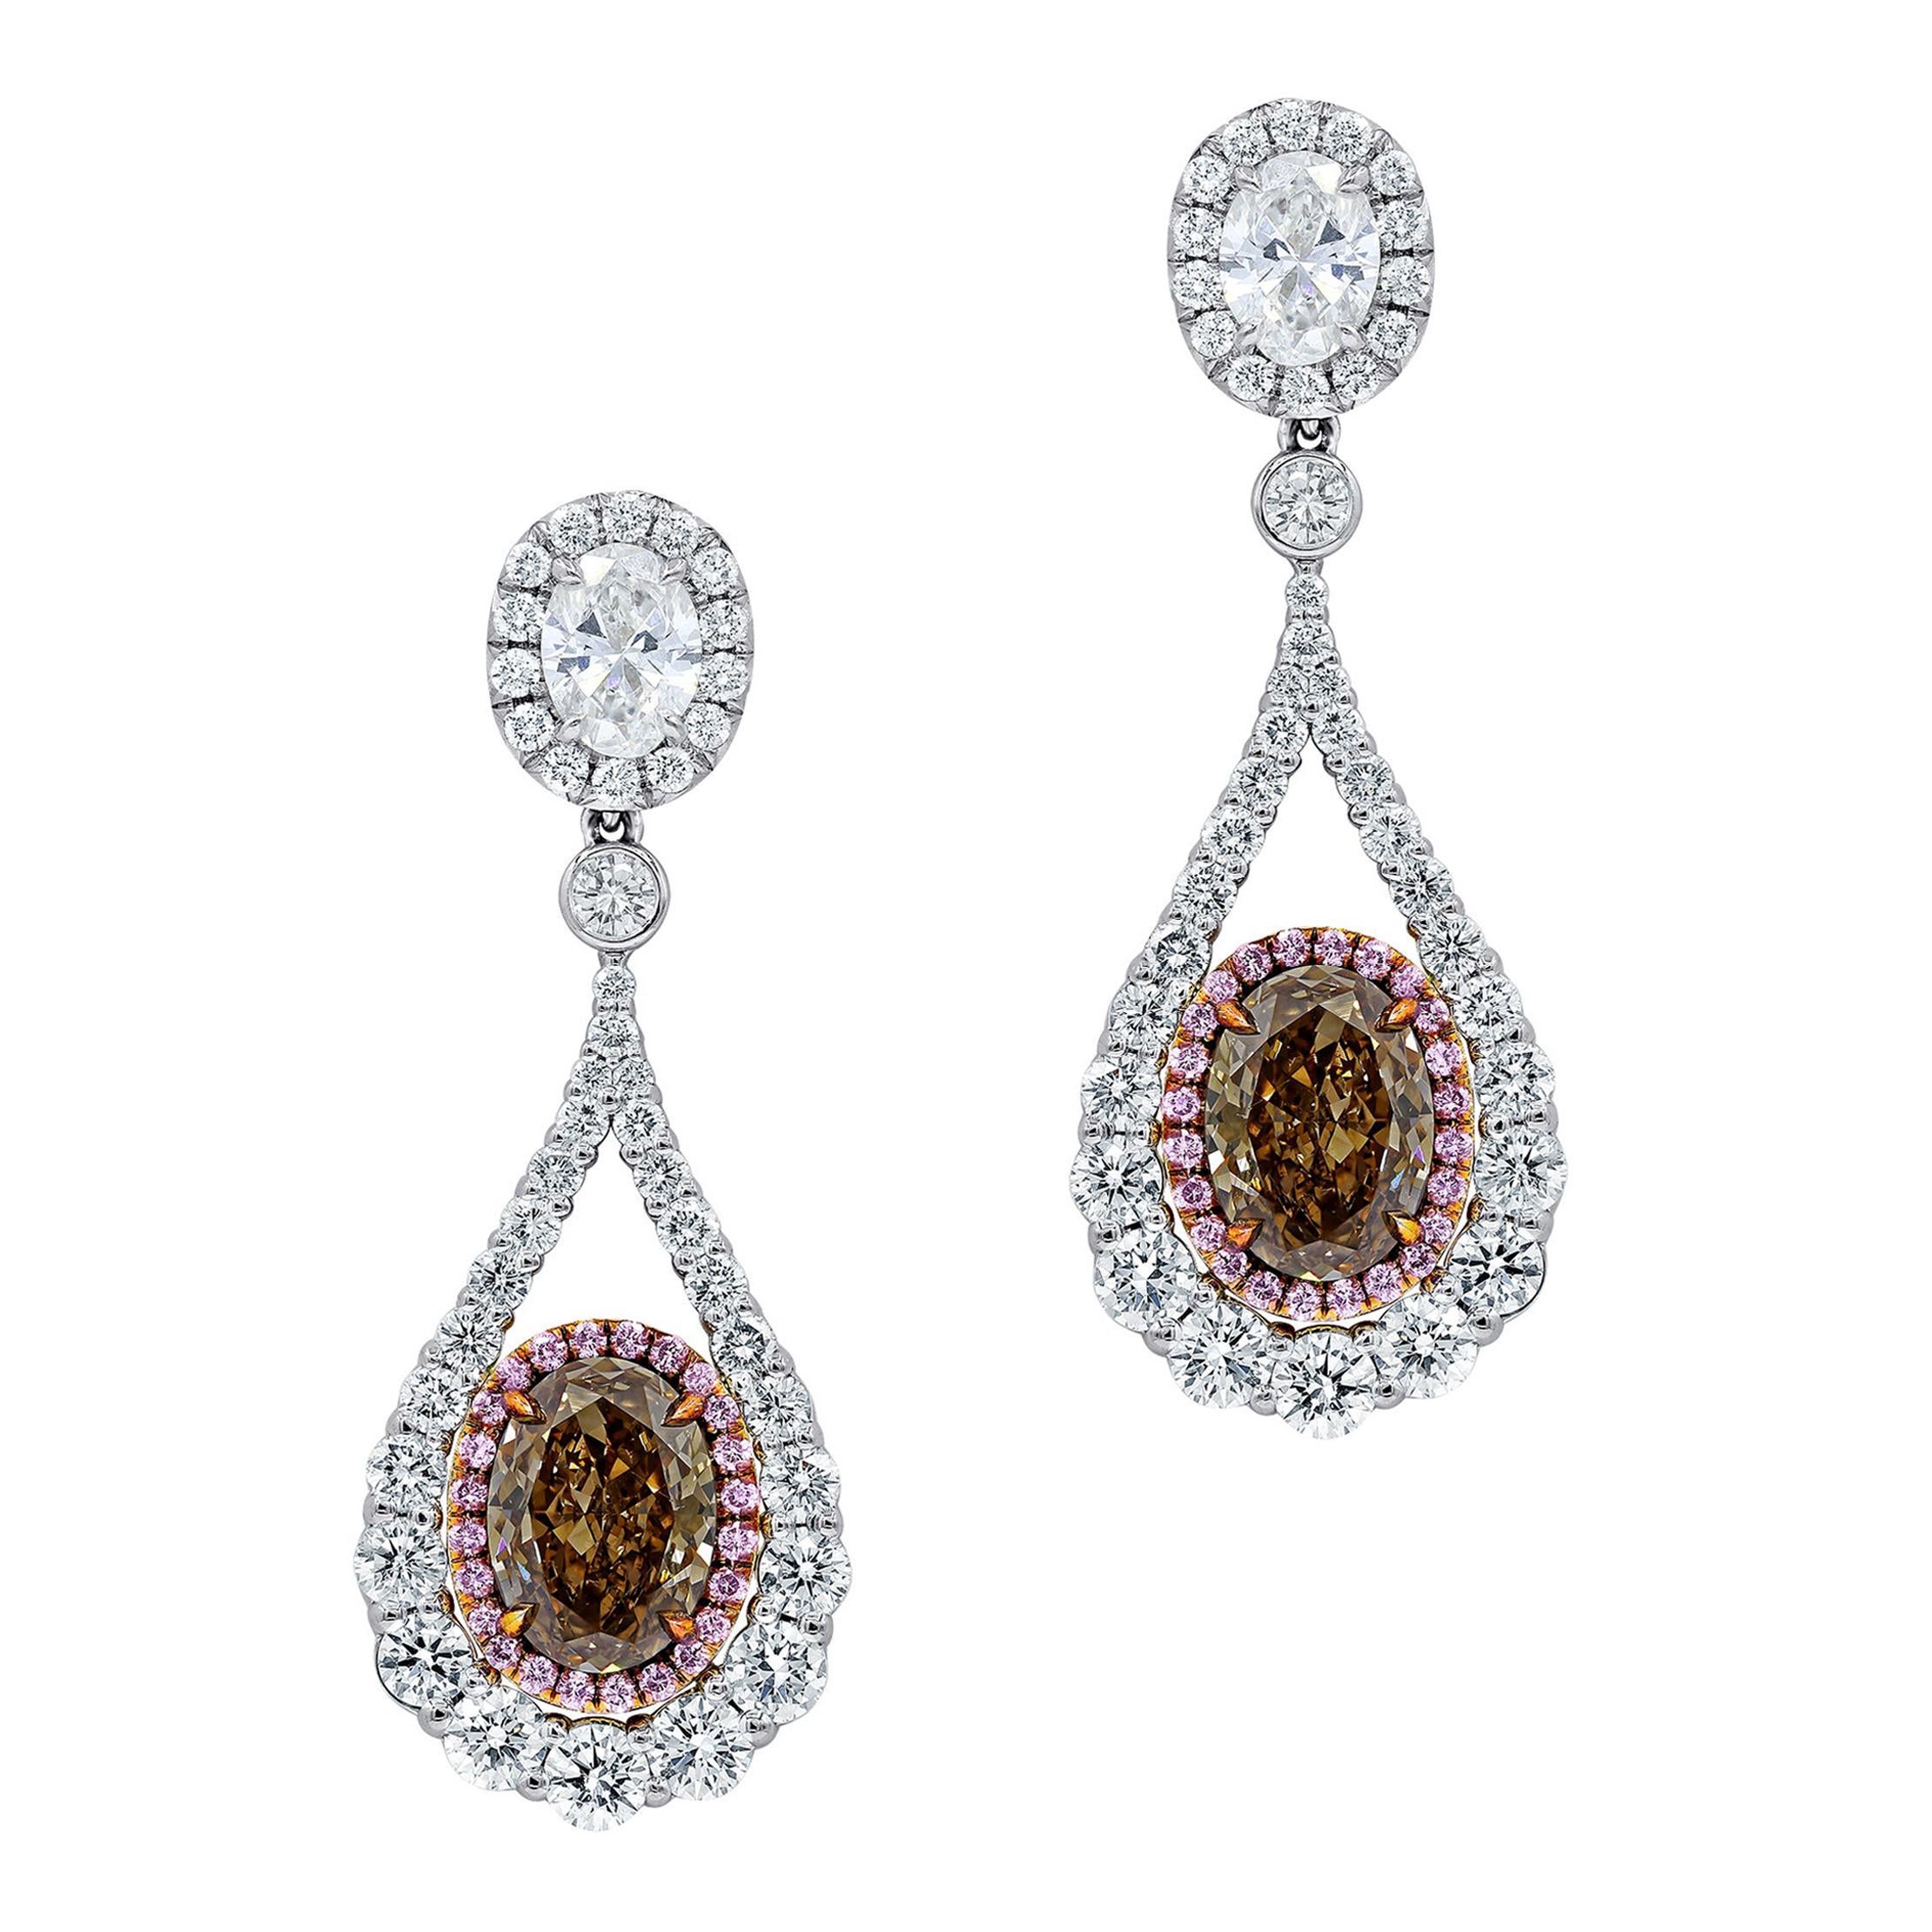 Platinum Diamond Earrings with 5.40ct of Total Diamond For Sale